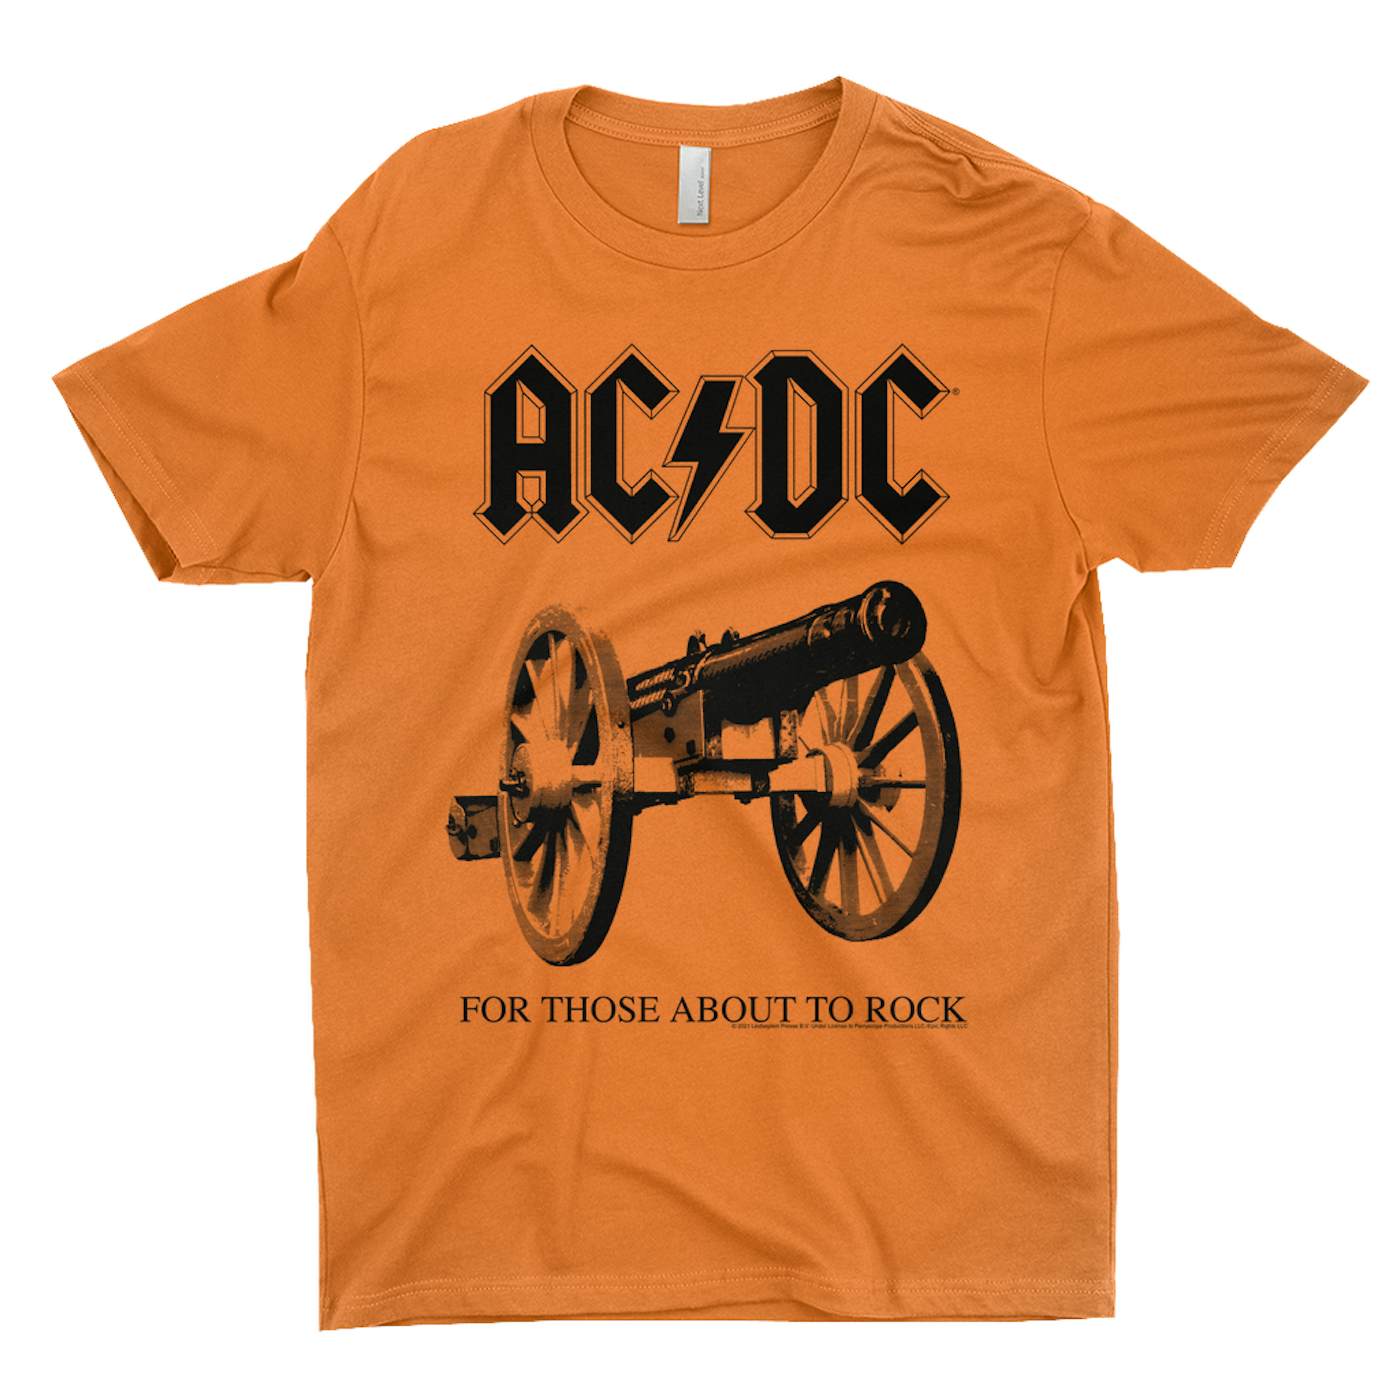 AC/DC T-Shirt For Shirt To | Those About Image Rock Cannon Black